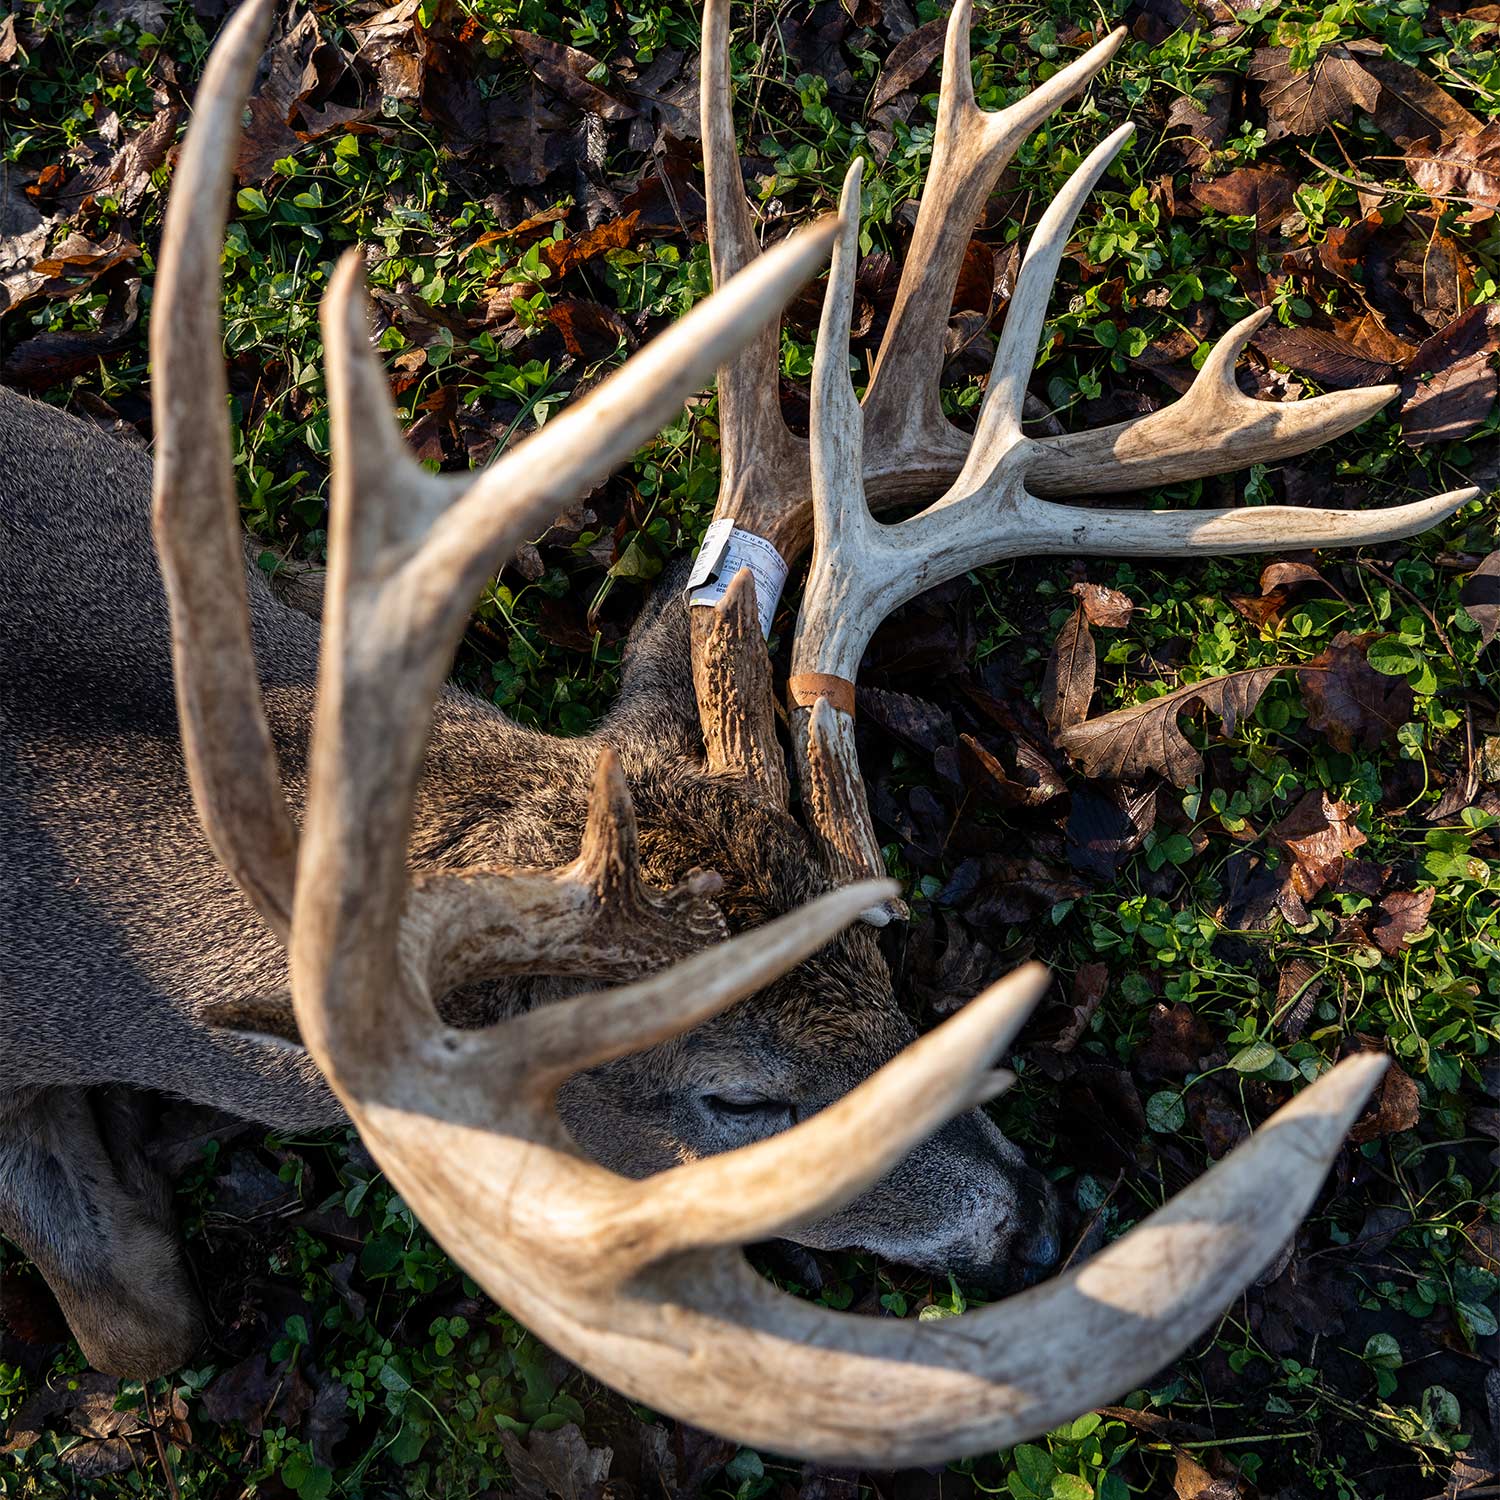 A whitetail deer on the ground with its antlers tagged.